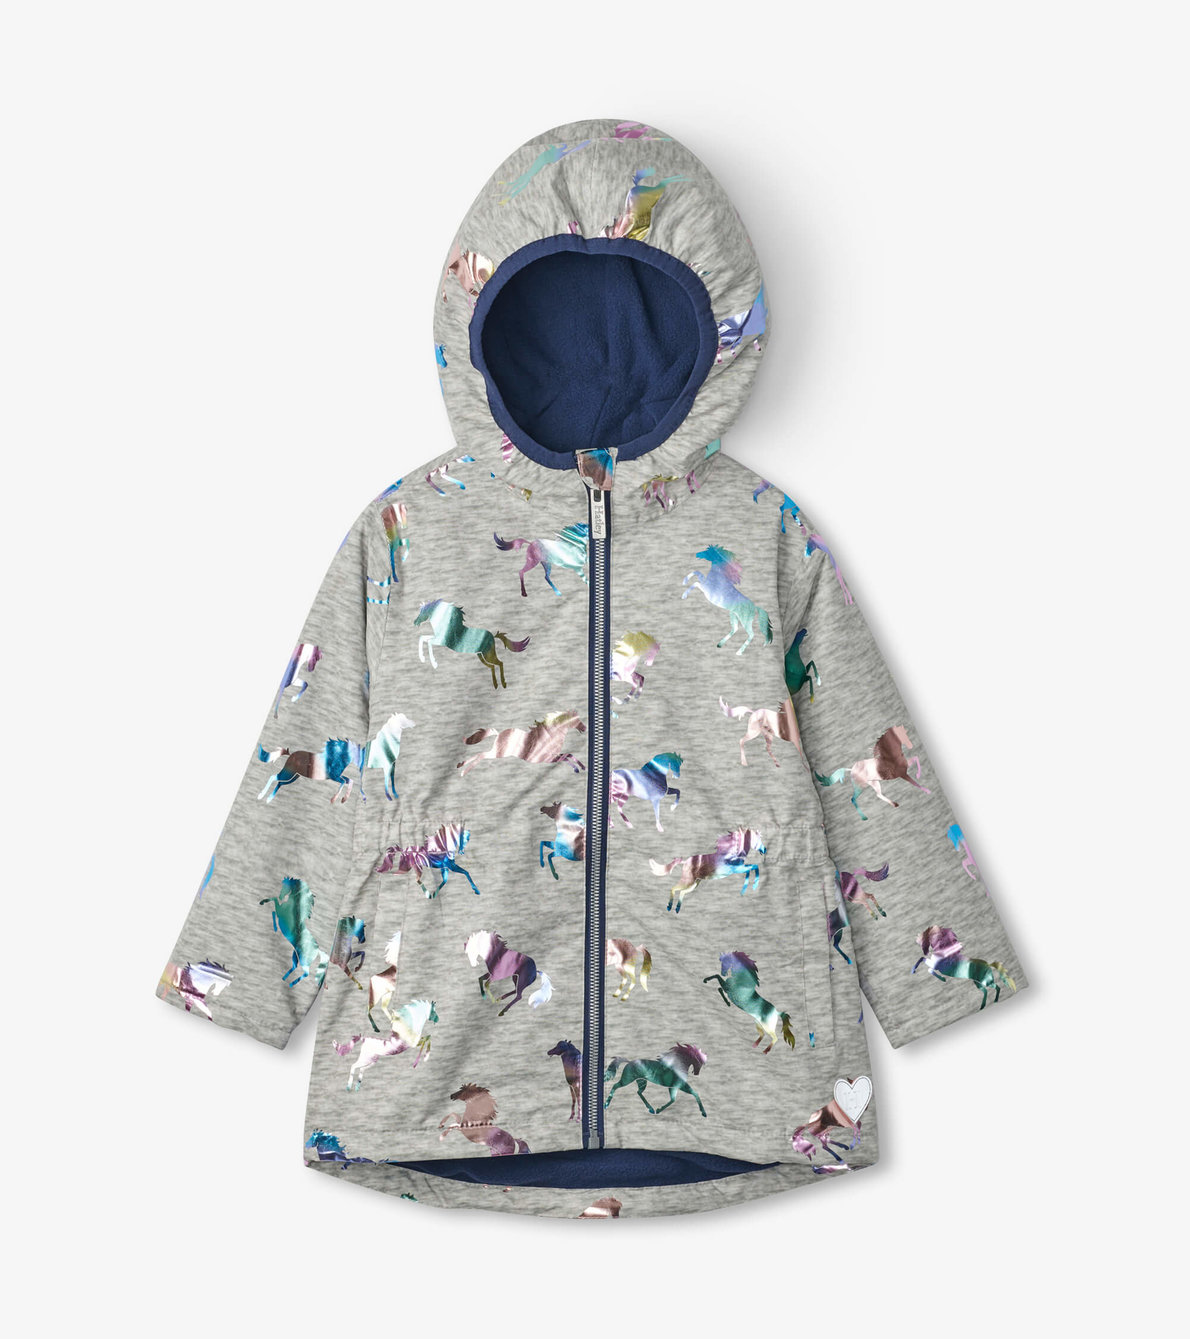 View larger image of Rainbow Horses Microfleece Lined Jacket